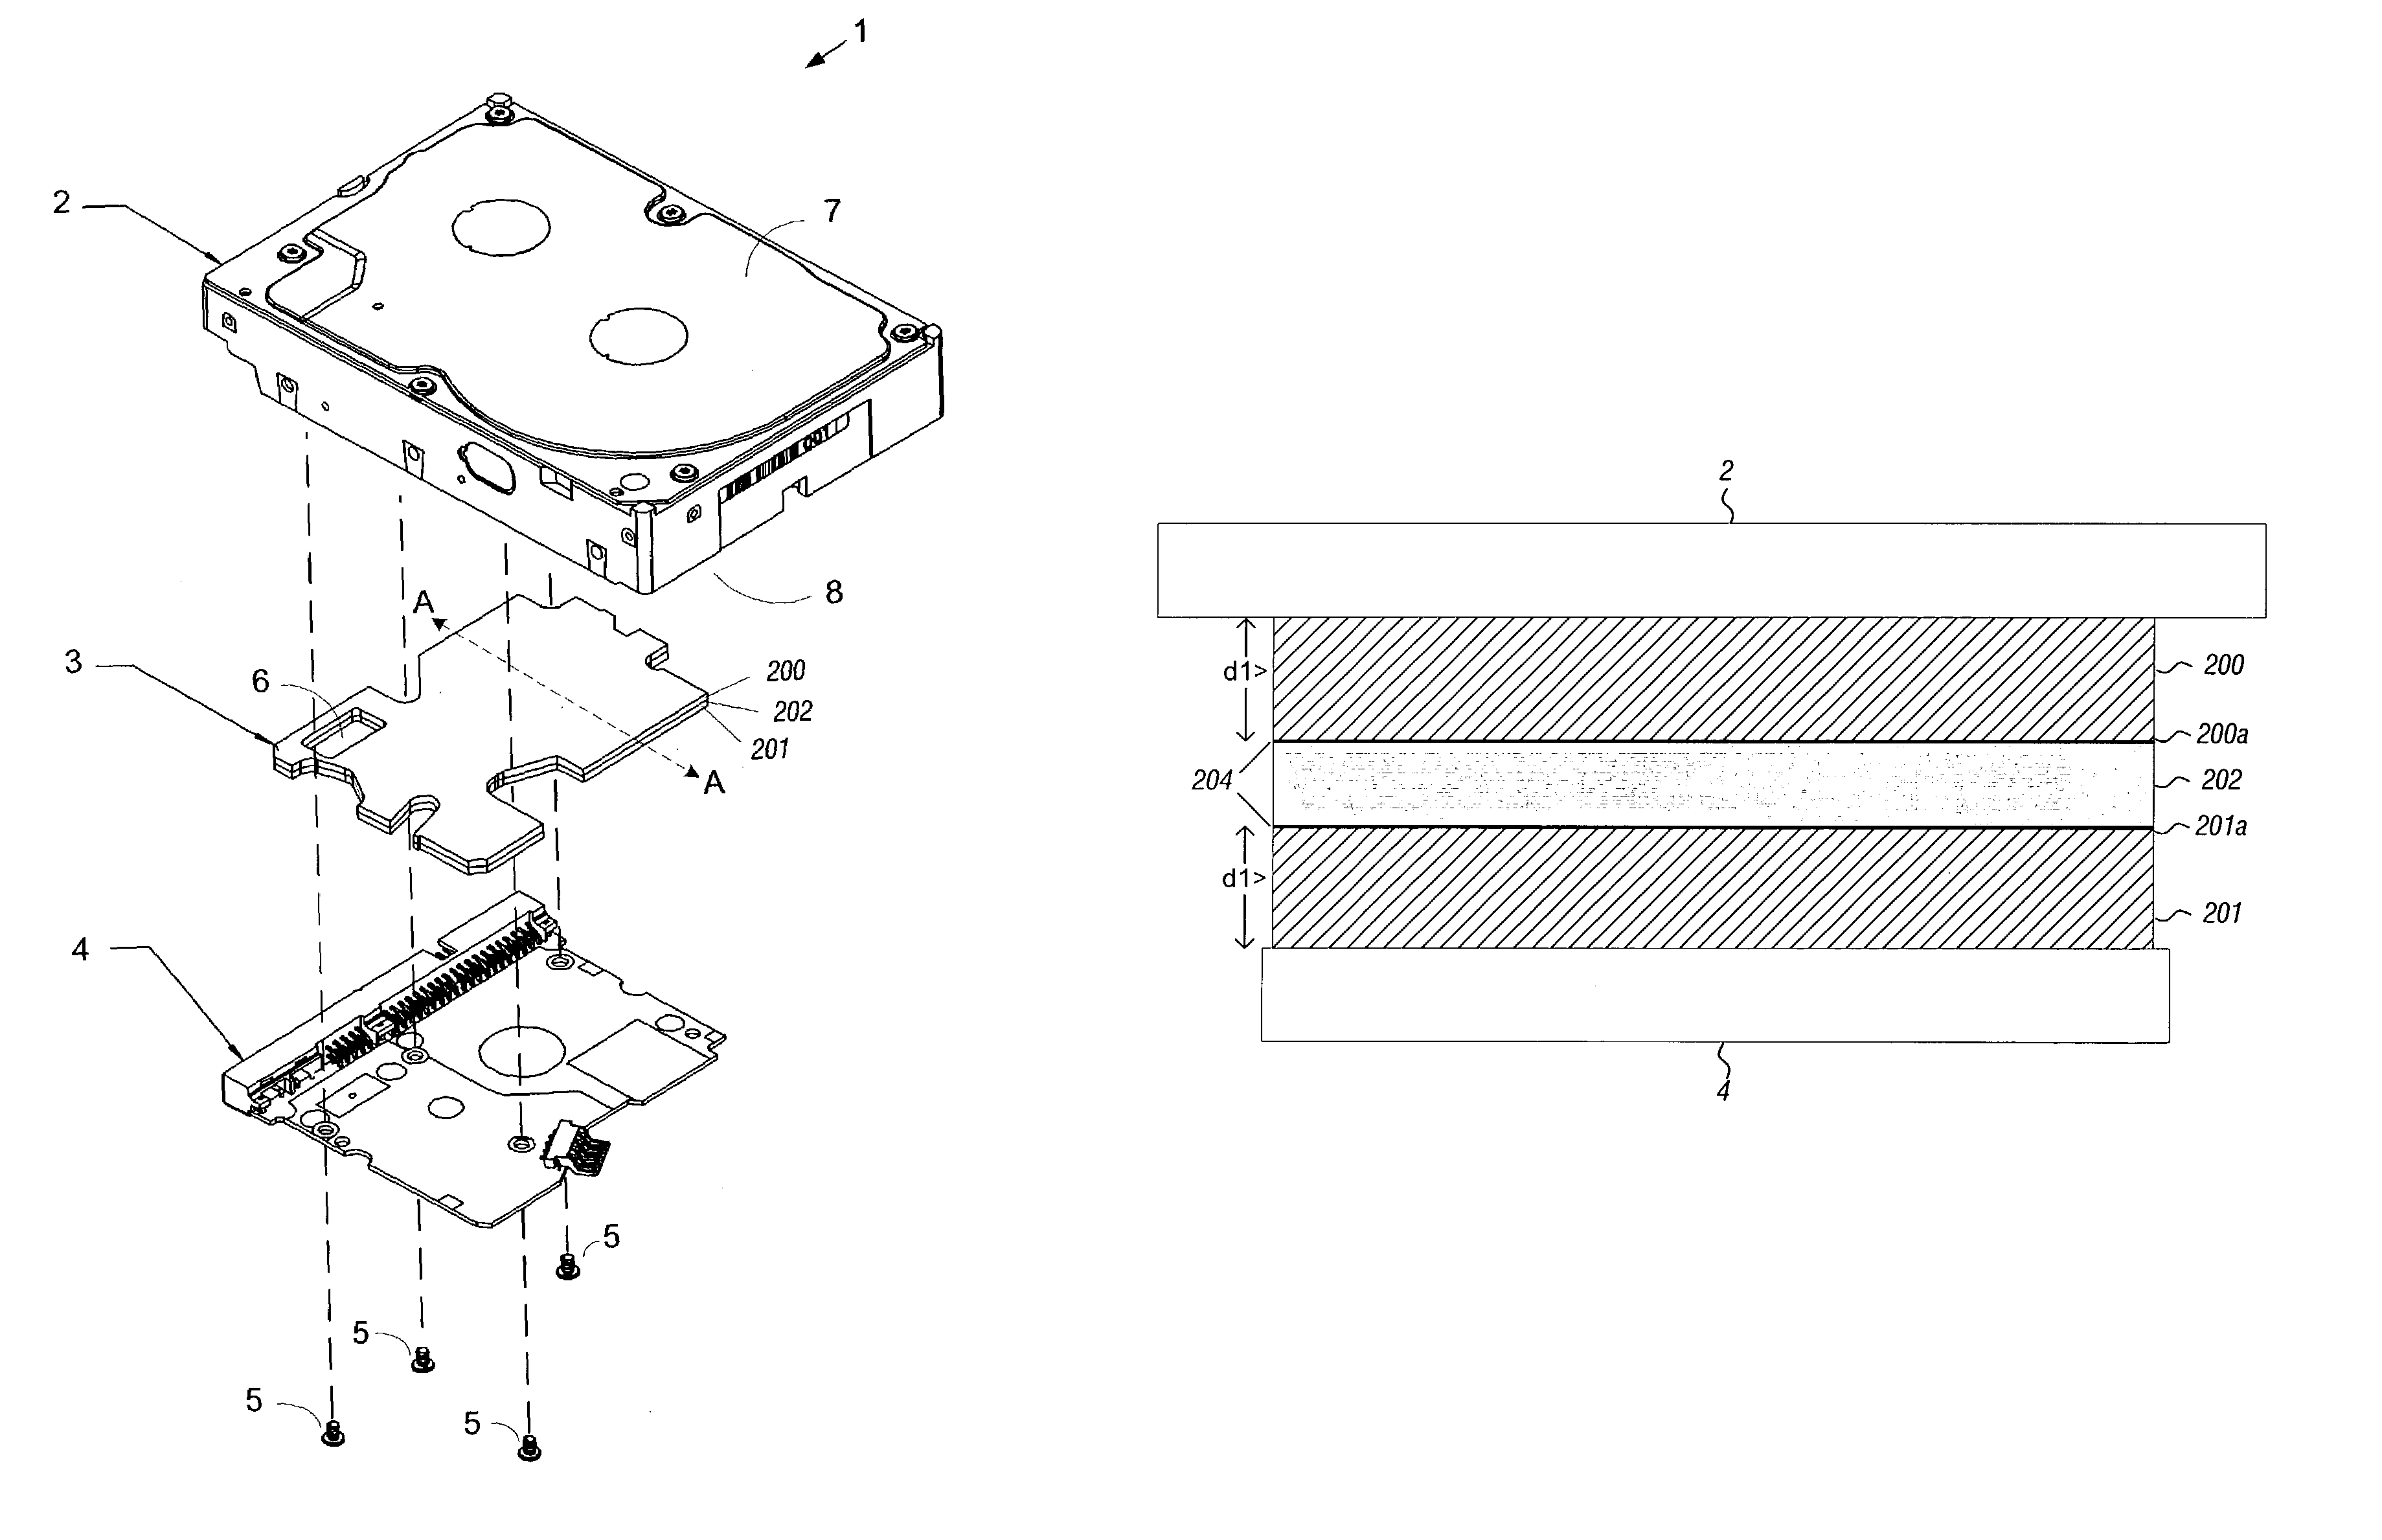 Disk drive having an acoustic damping assembly with an acoustic barrier layer